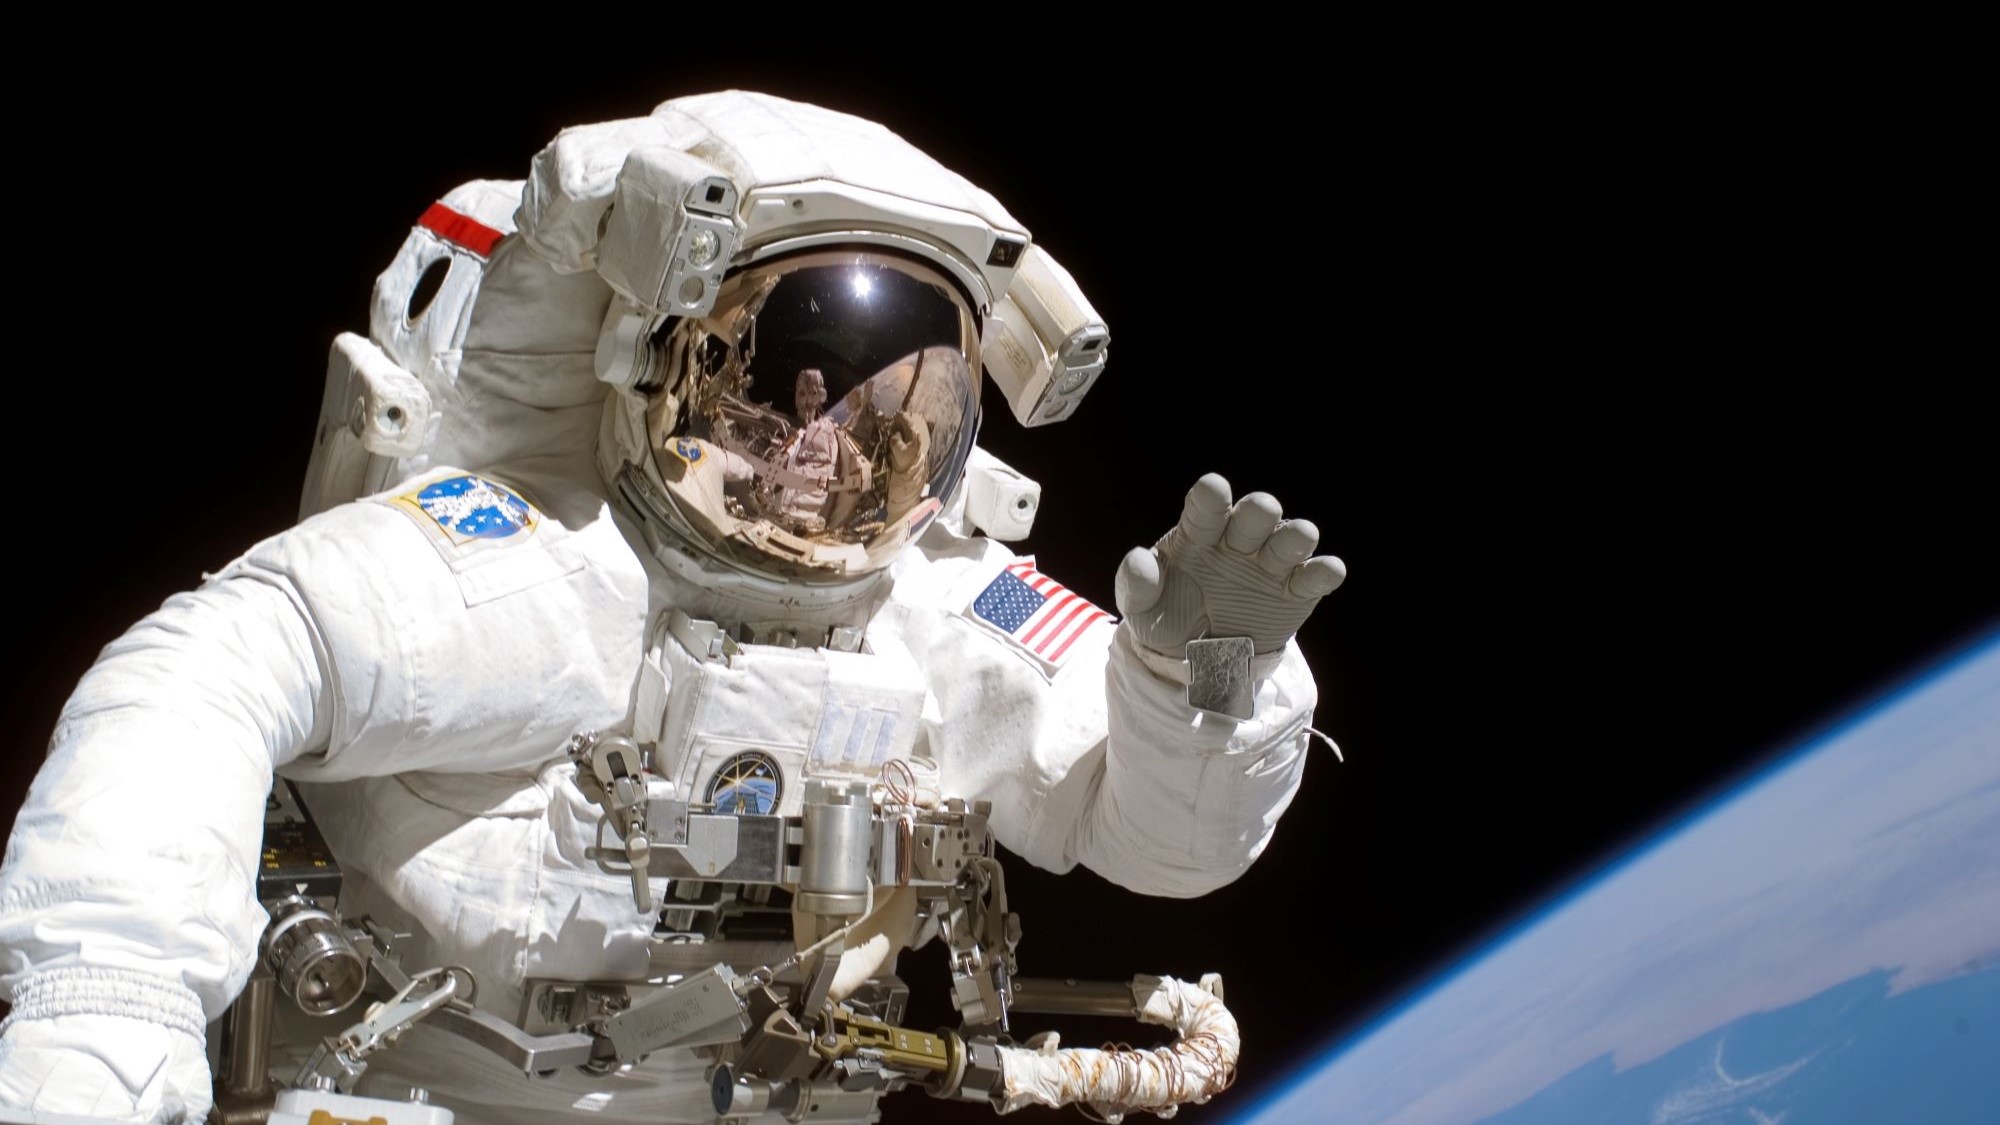 Why we need a code of ethics to study space tourists